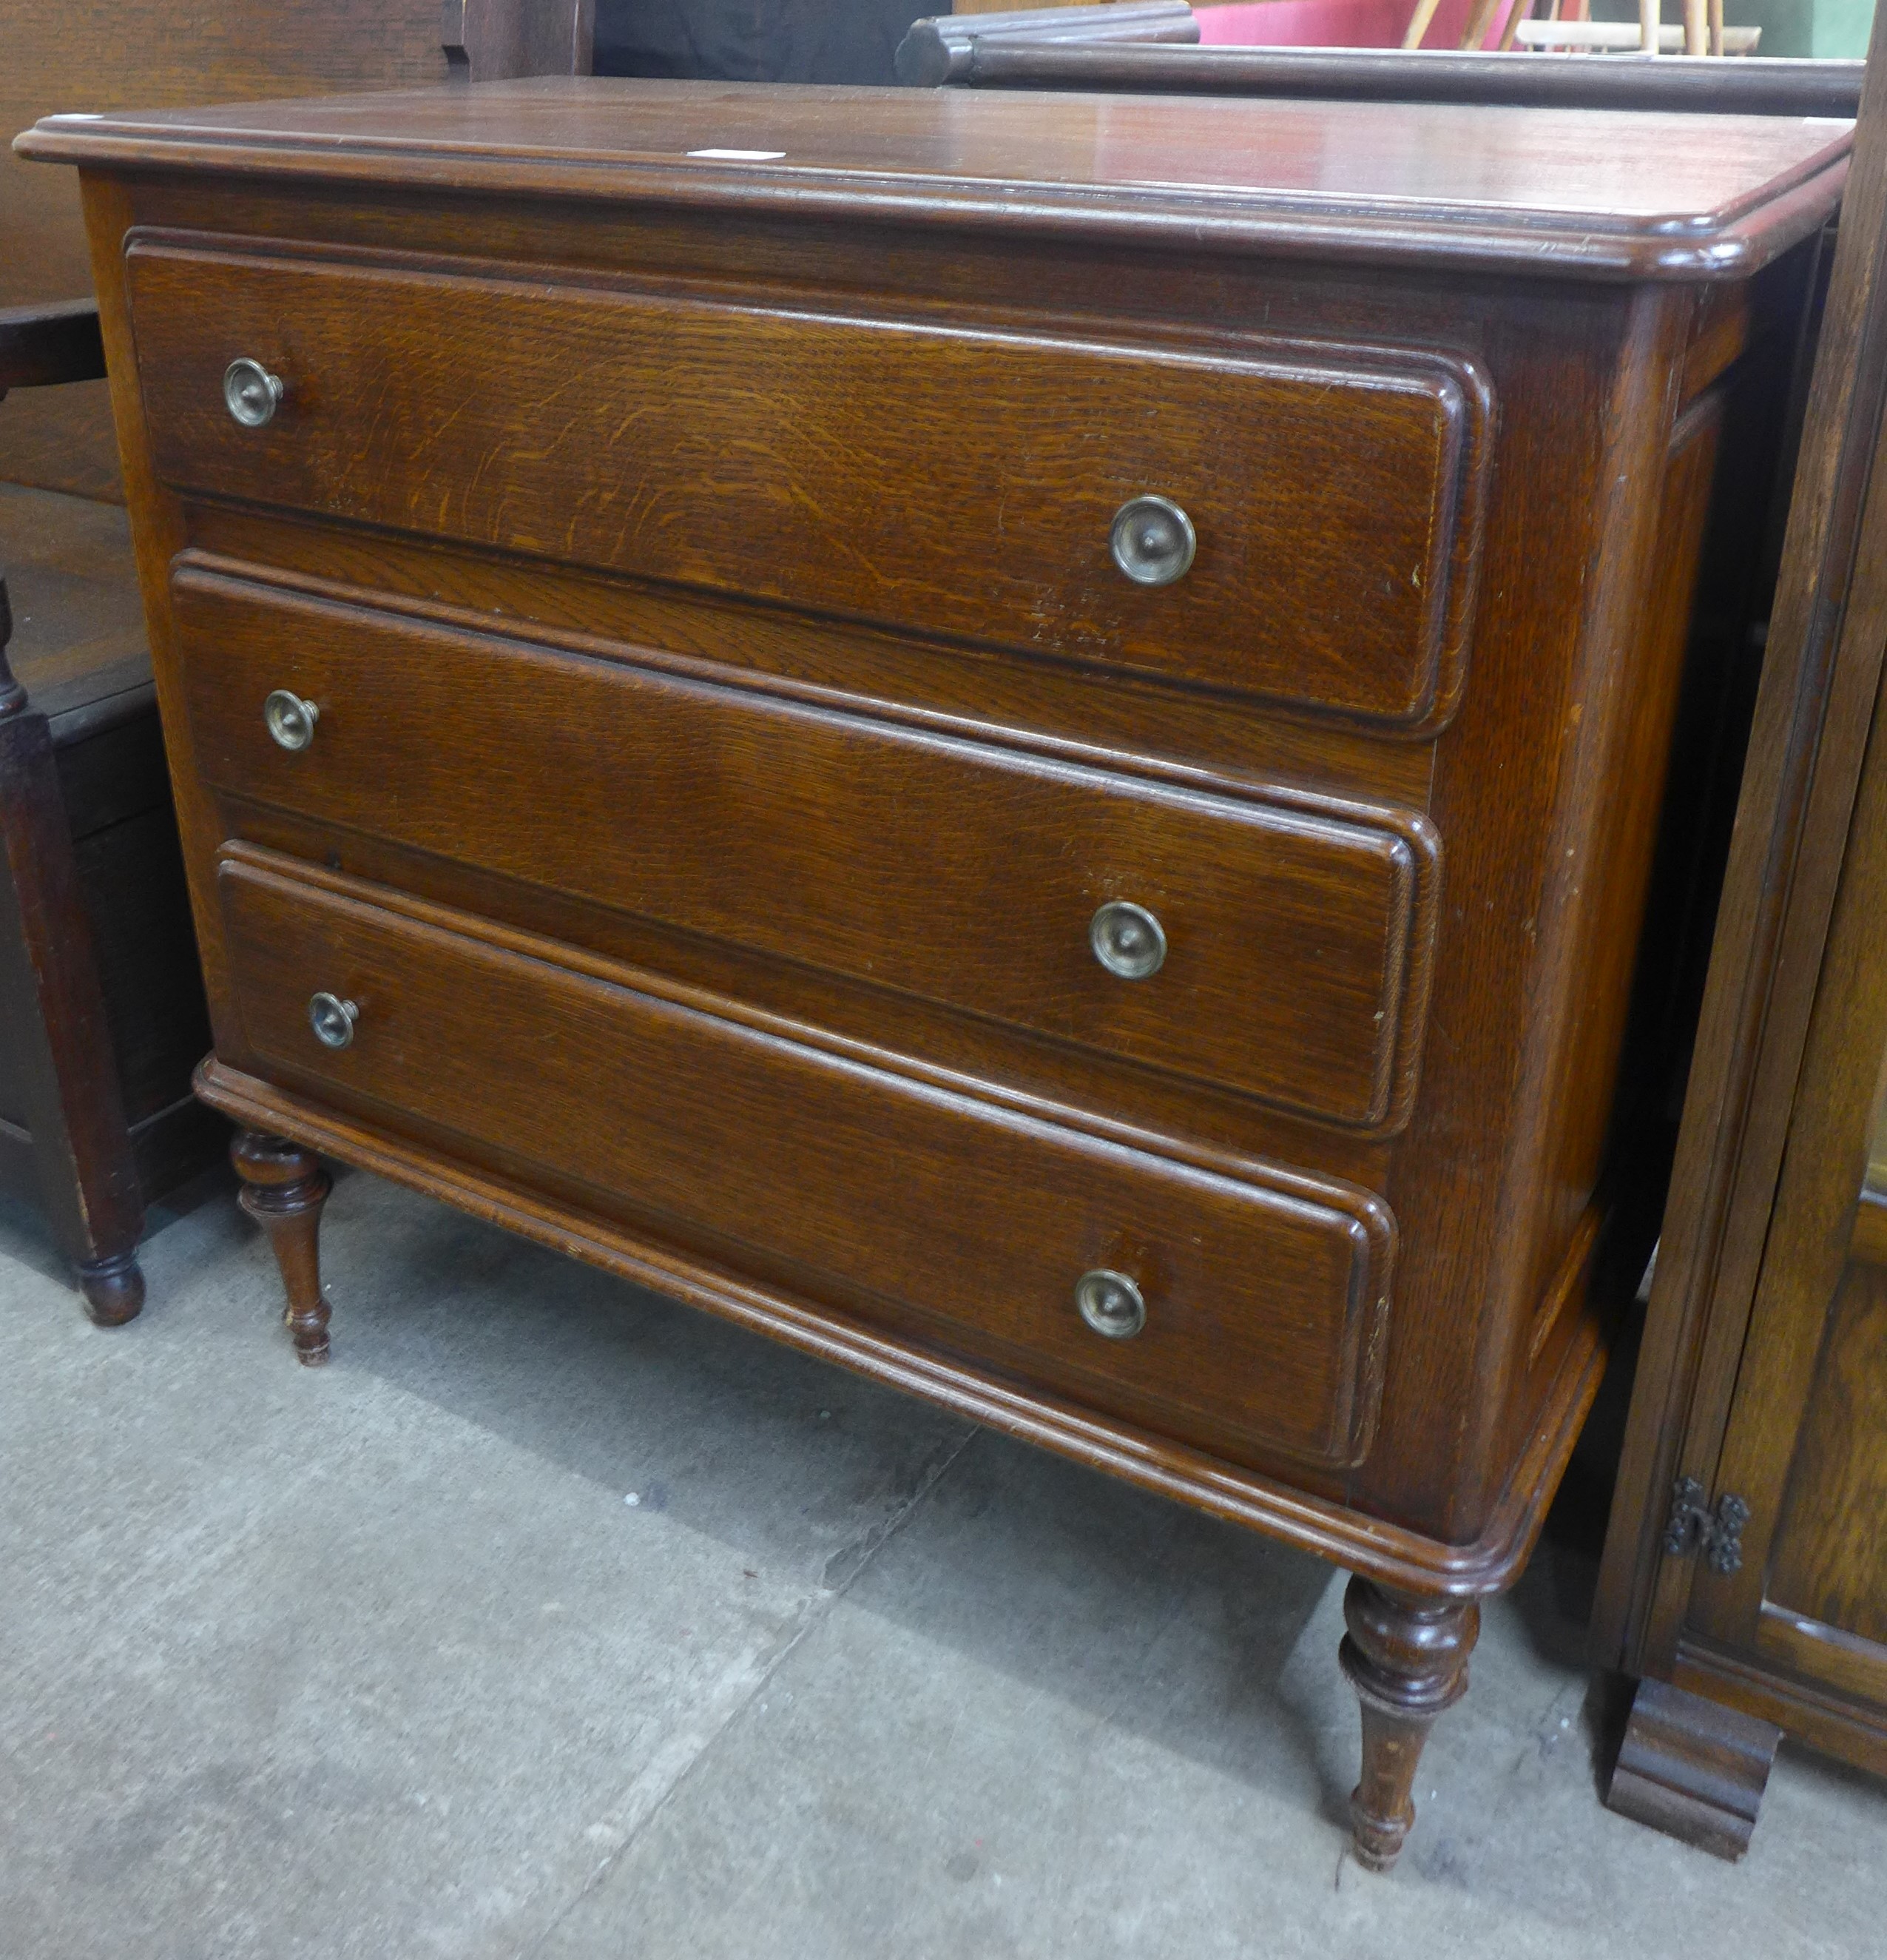 A 19th Century style French beech chest of drawers - Image 2 of 3